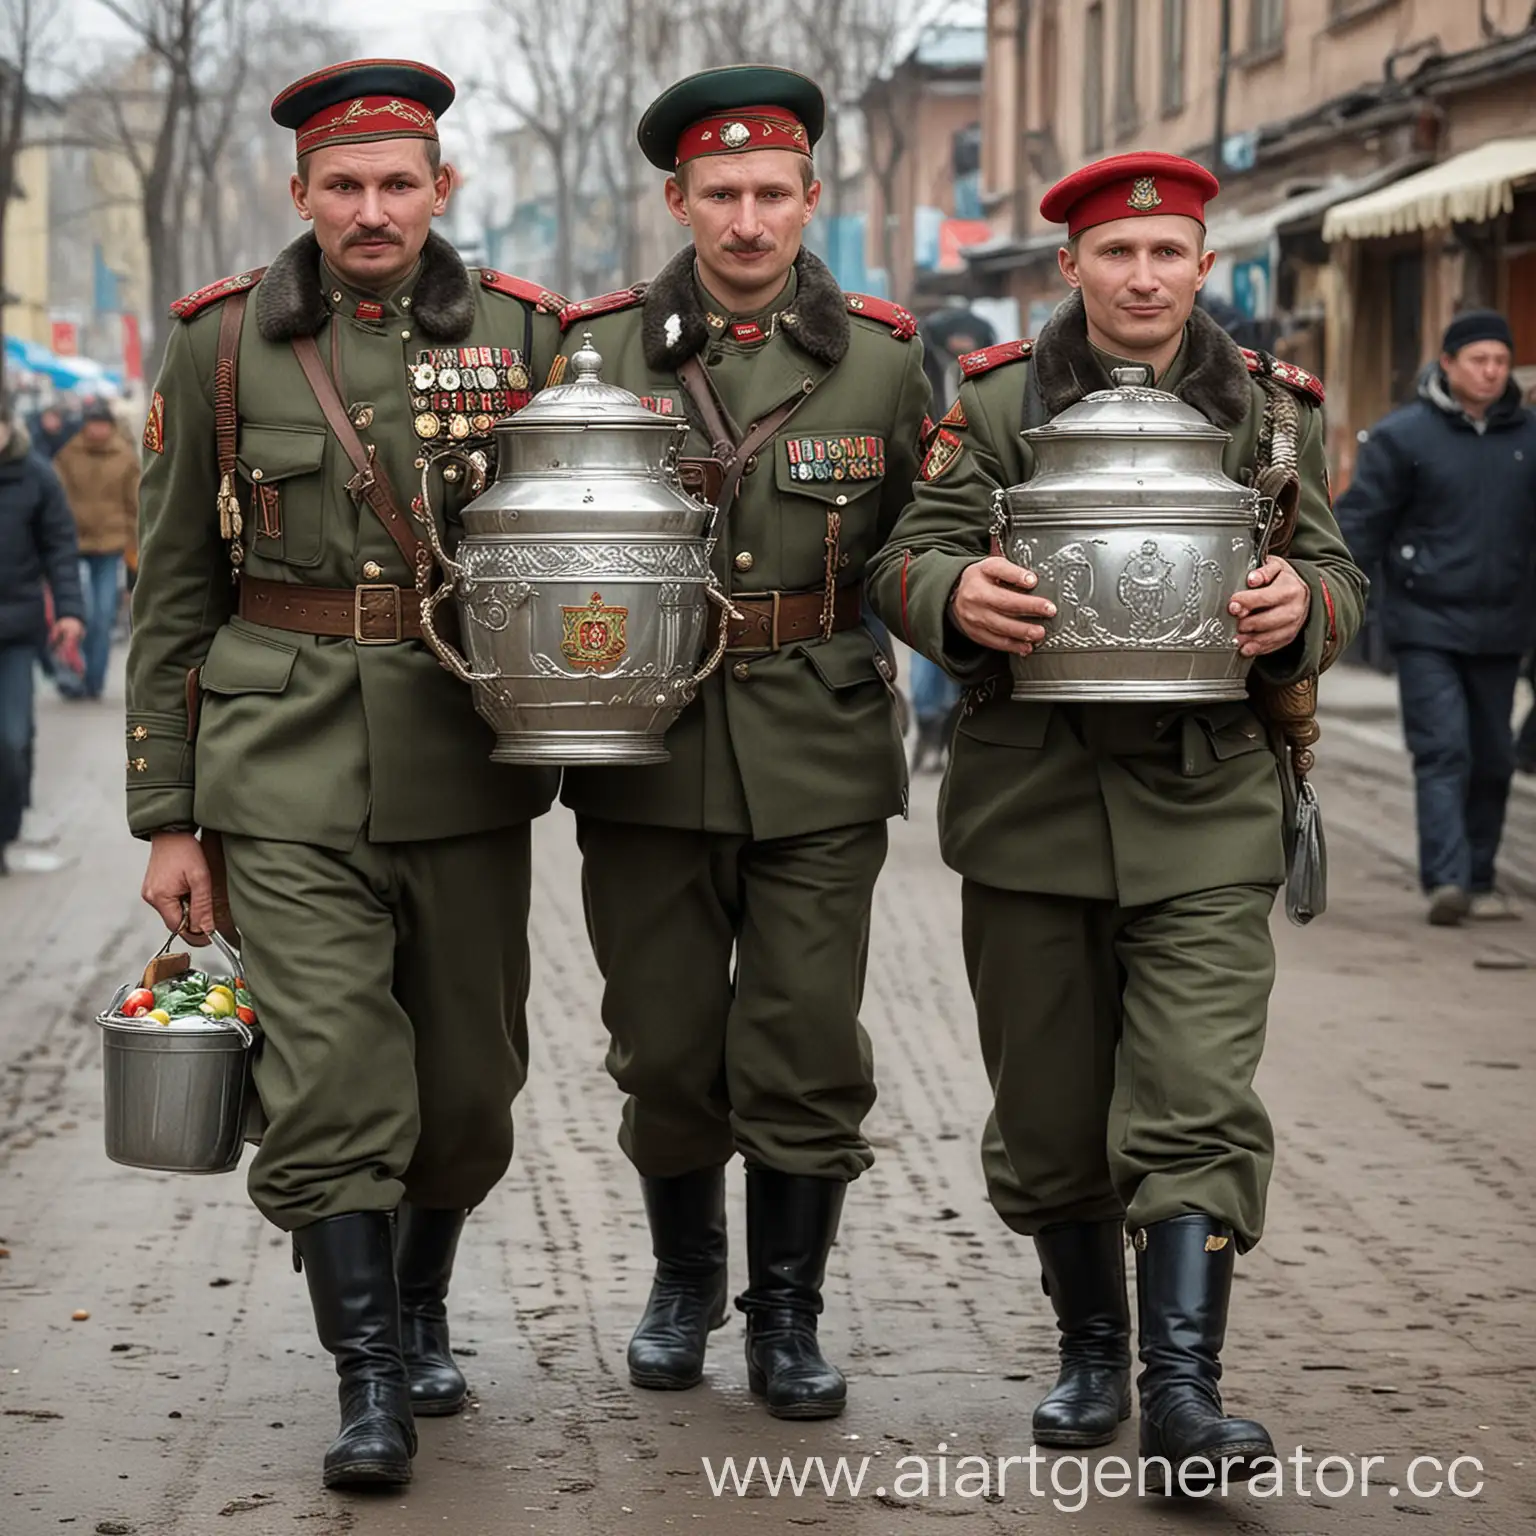 Humorous-Russian-Soldiers-Transporting-a-Samovar-to-the-Market